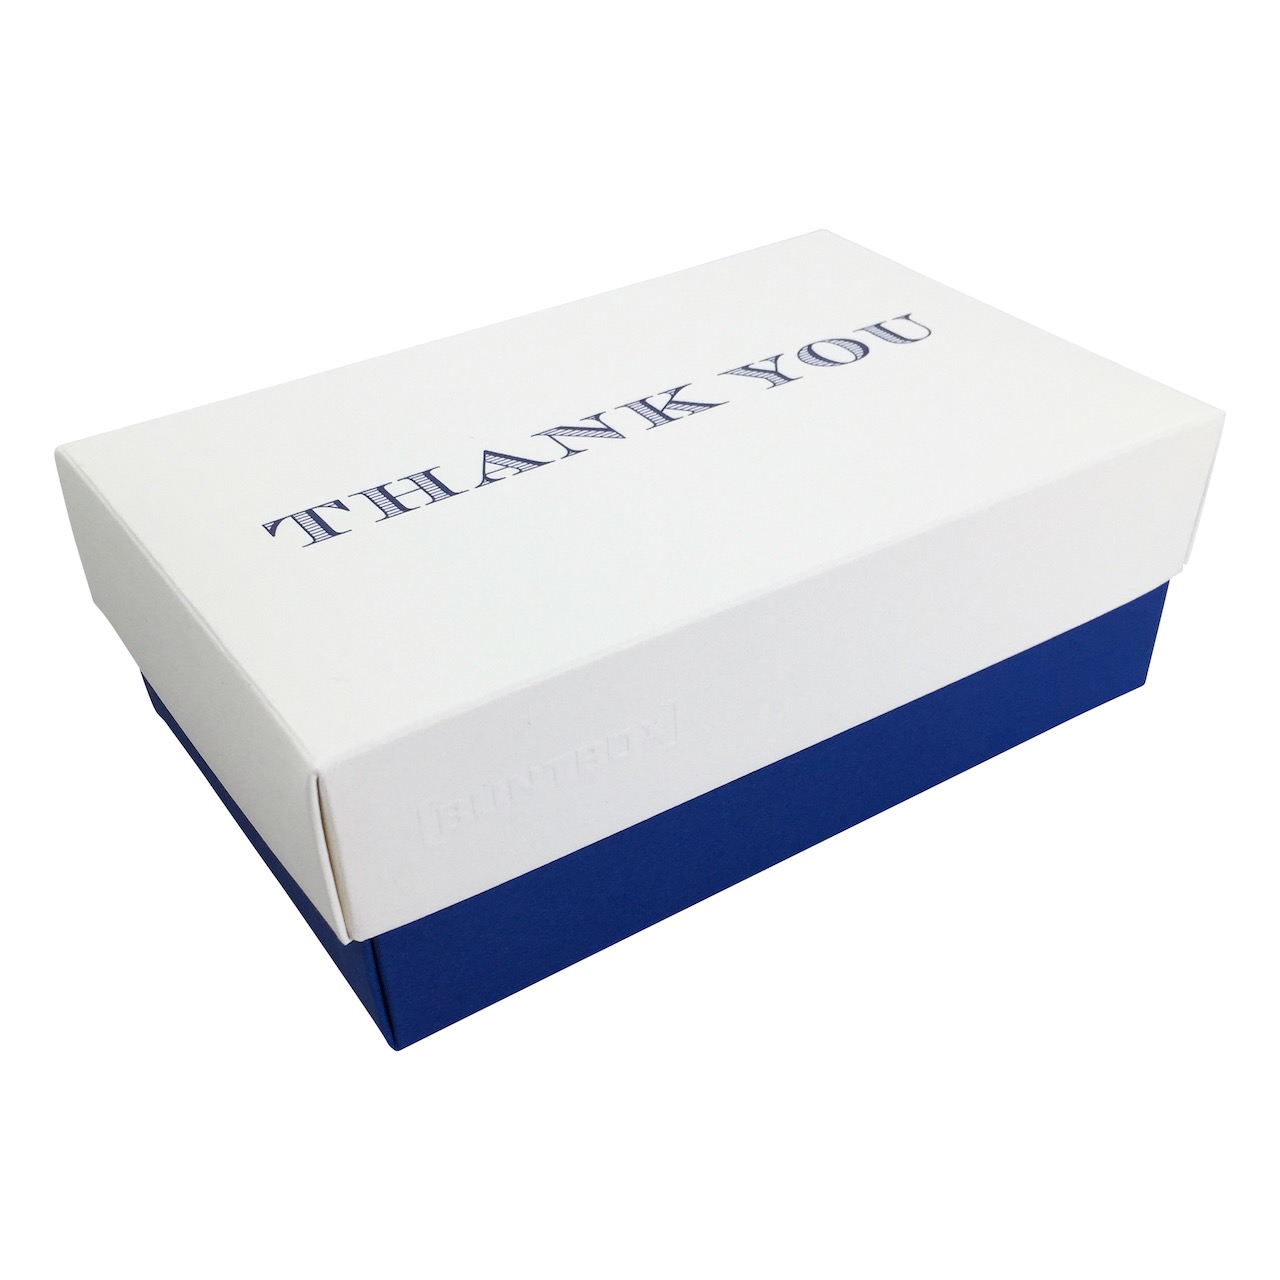 Buntbox M Fine Paper Thank You in Champagner-Saphir